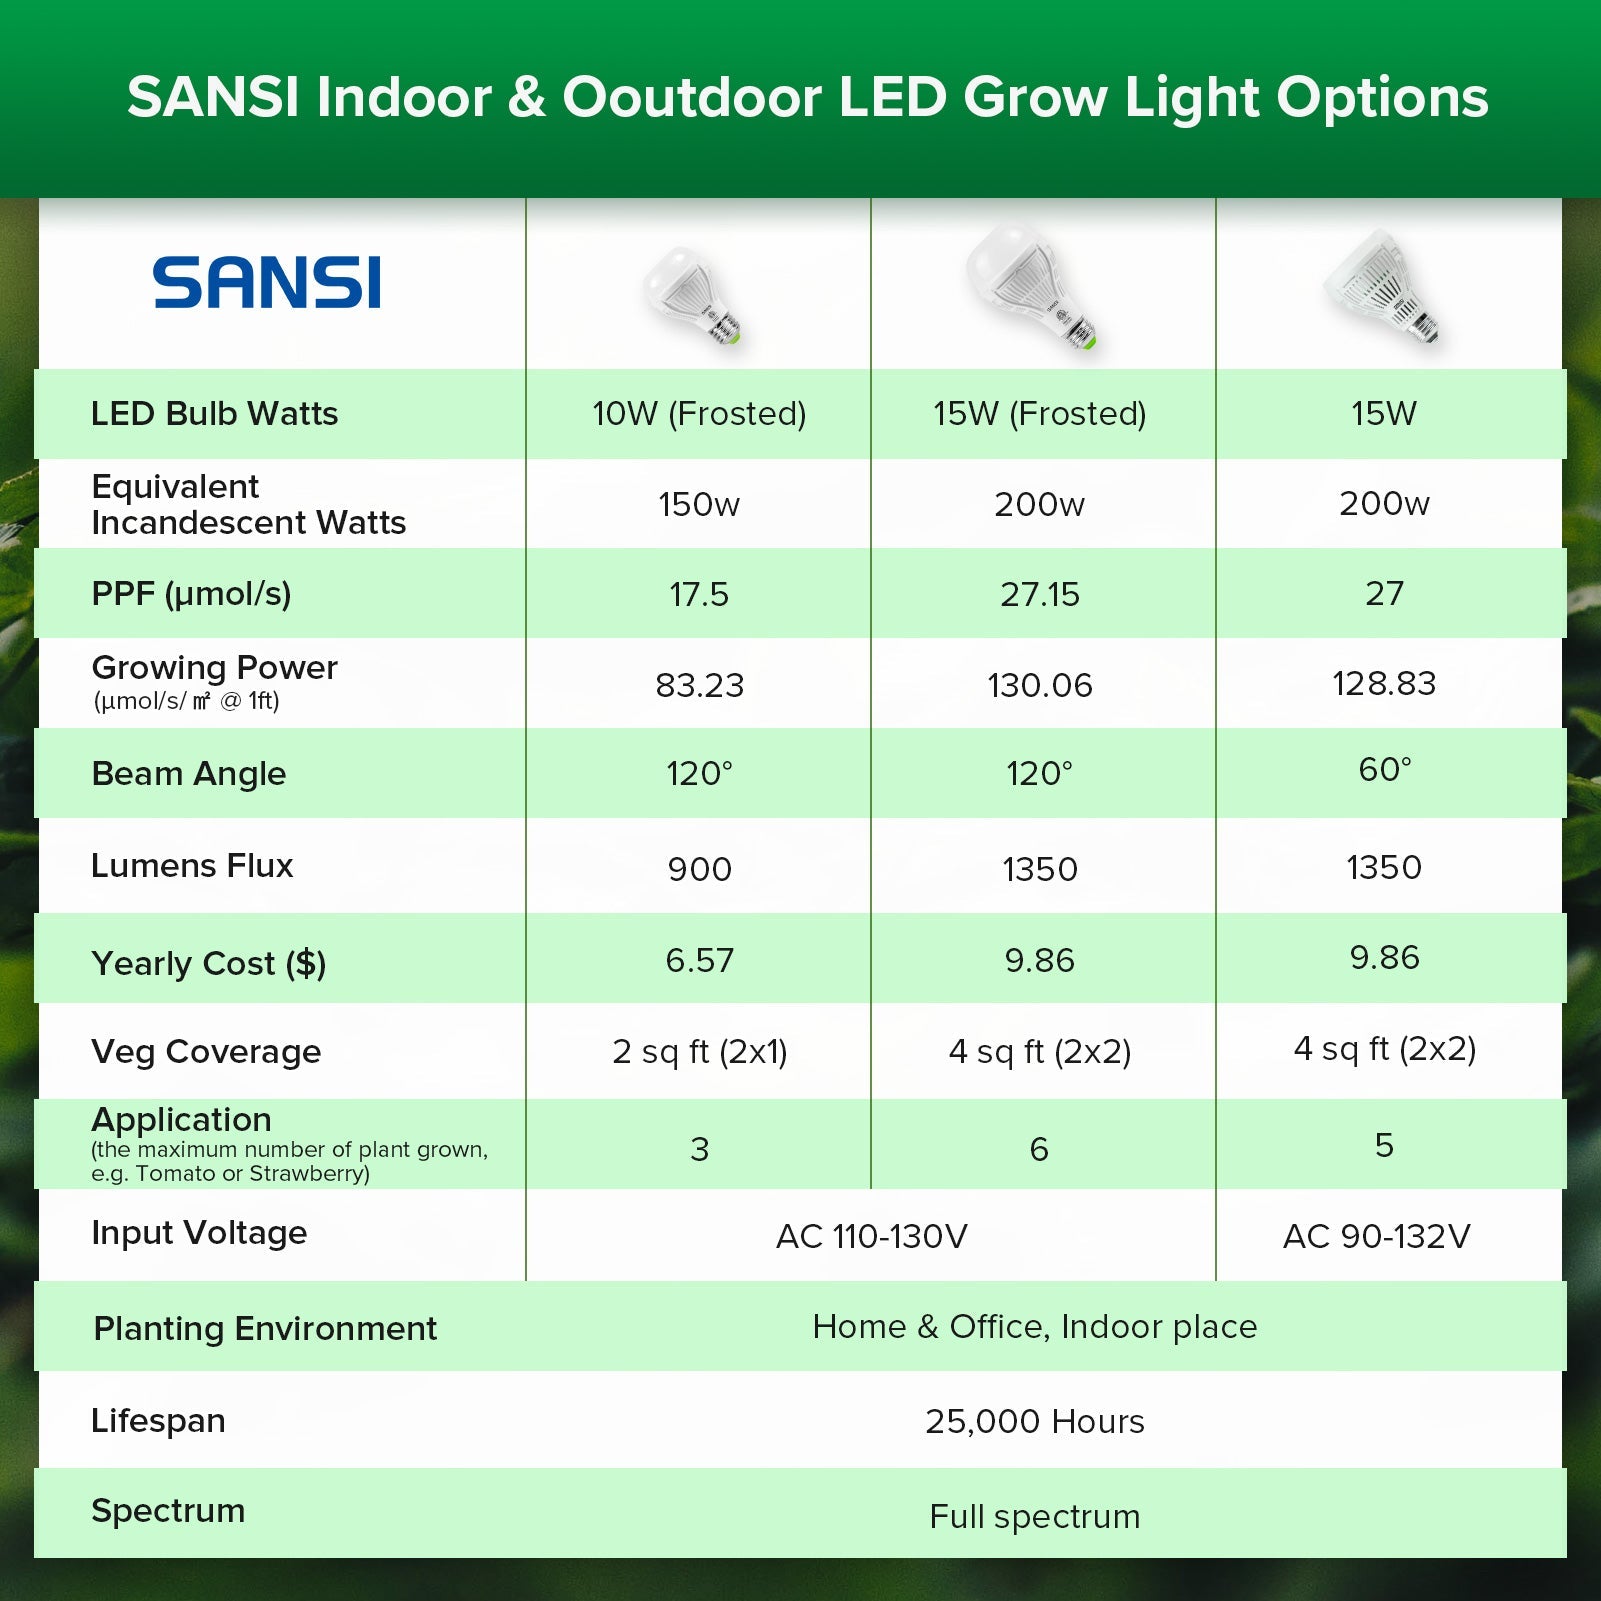 Compared with other SANSI LED grow light bulbs with similar power of A19 10W.